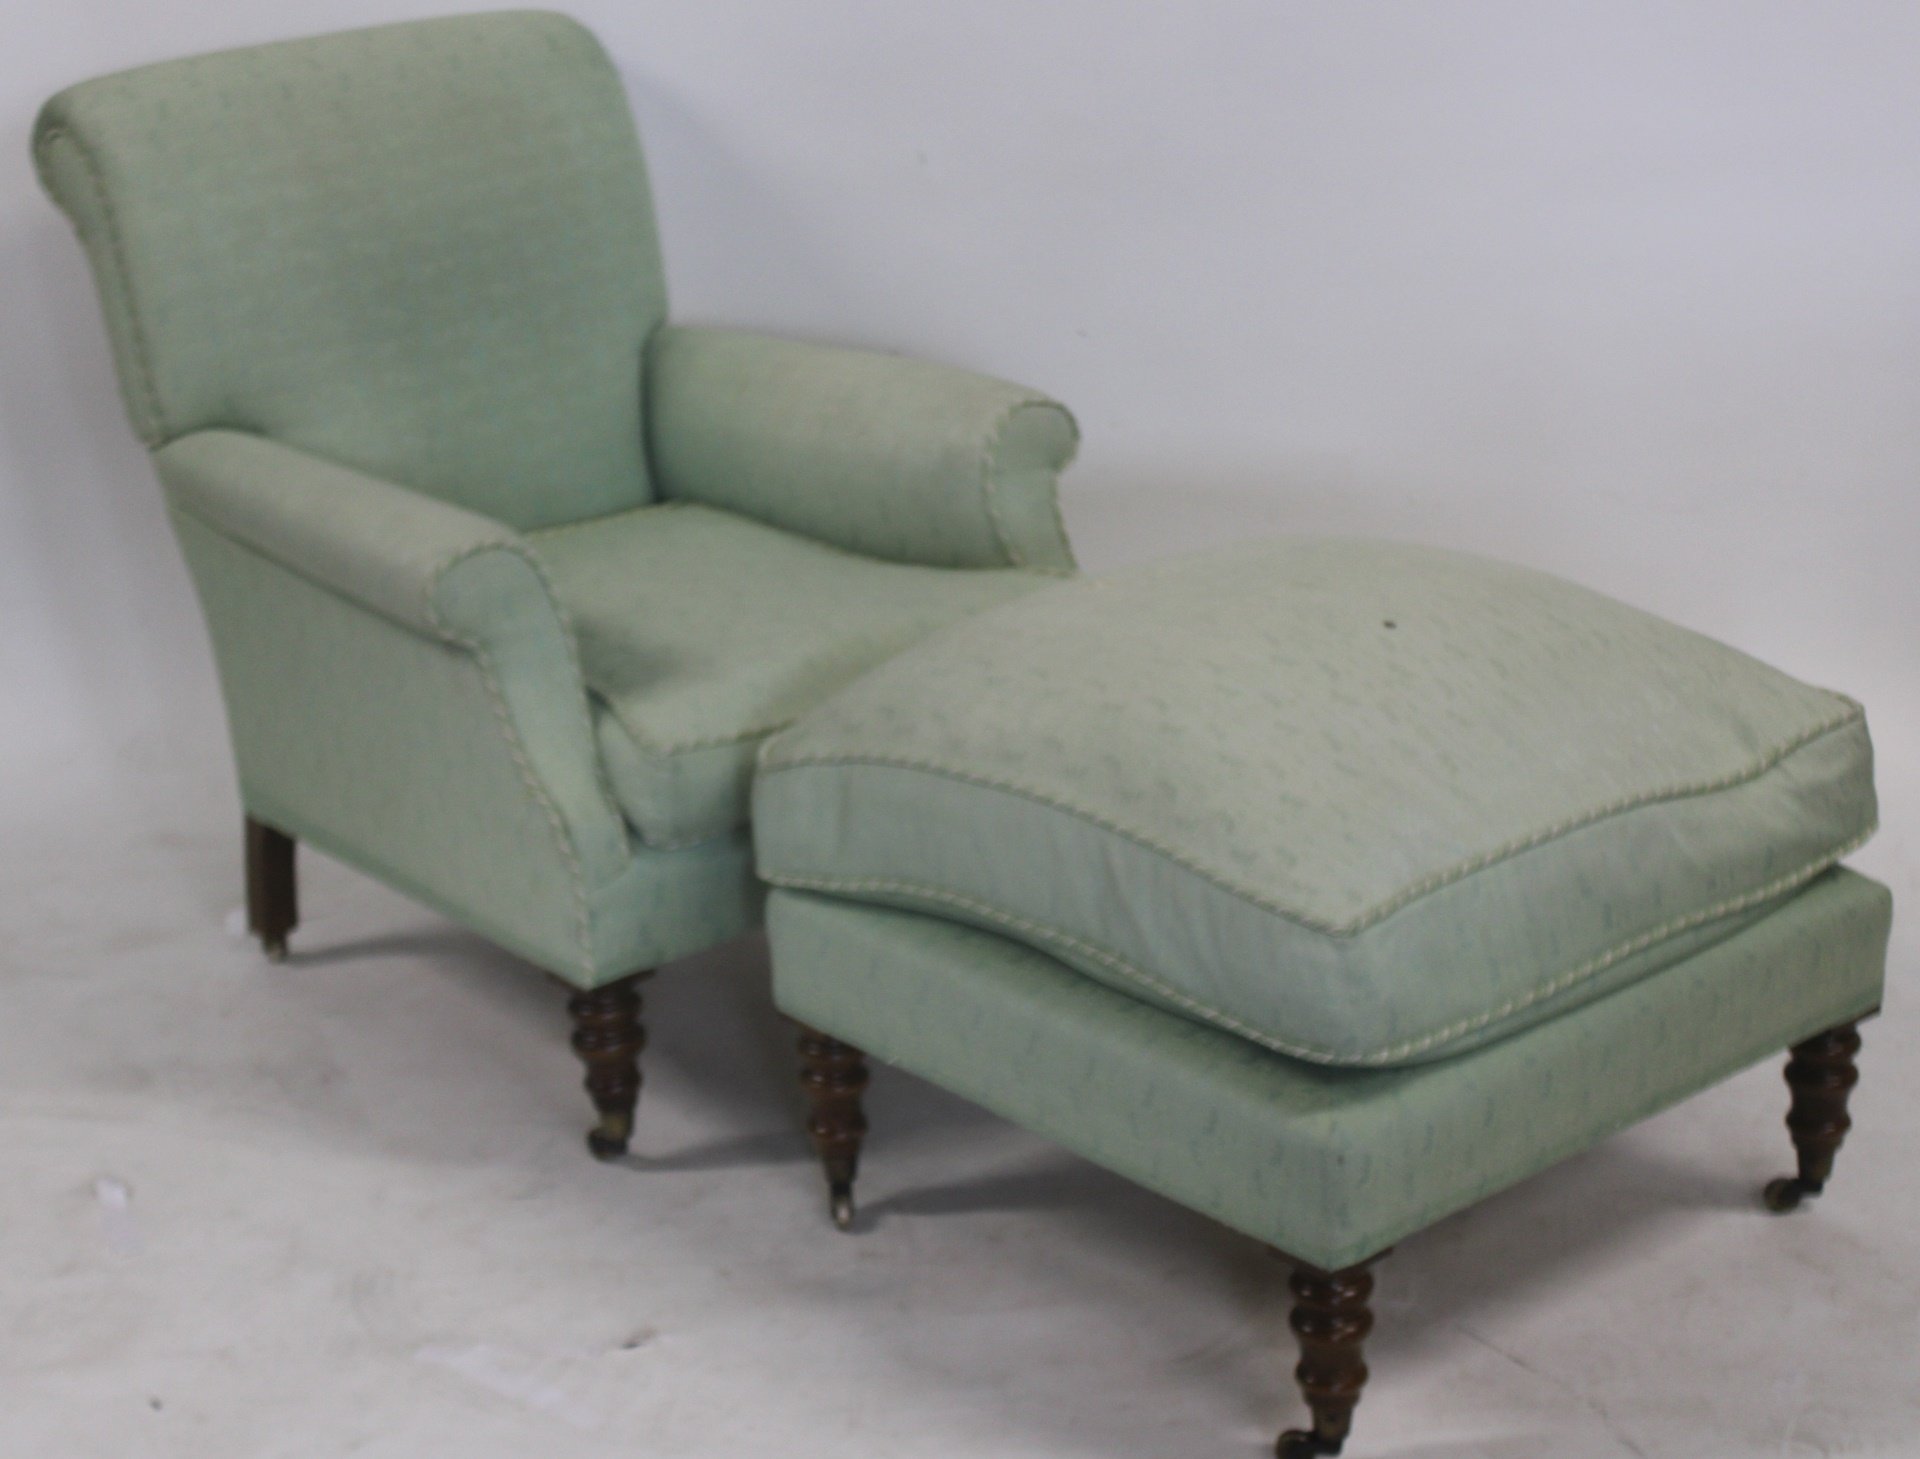 VINTAGE GEORGE SMITH STYLE UPHOLSTERED 3bac89